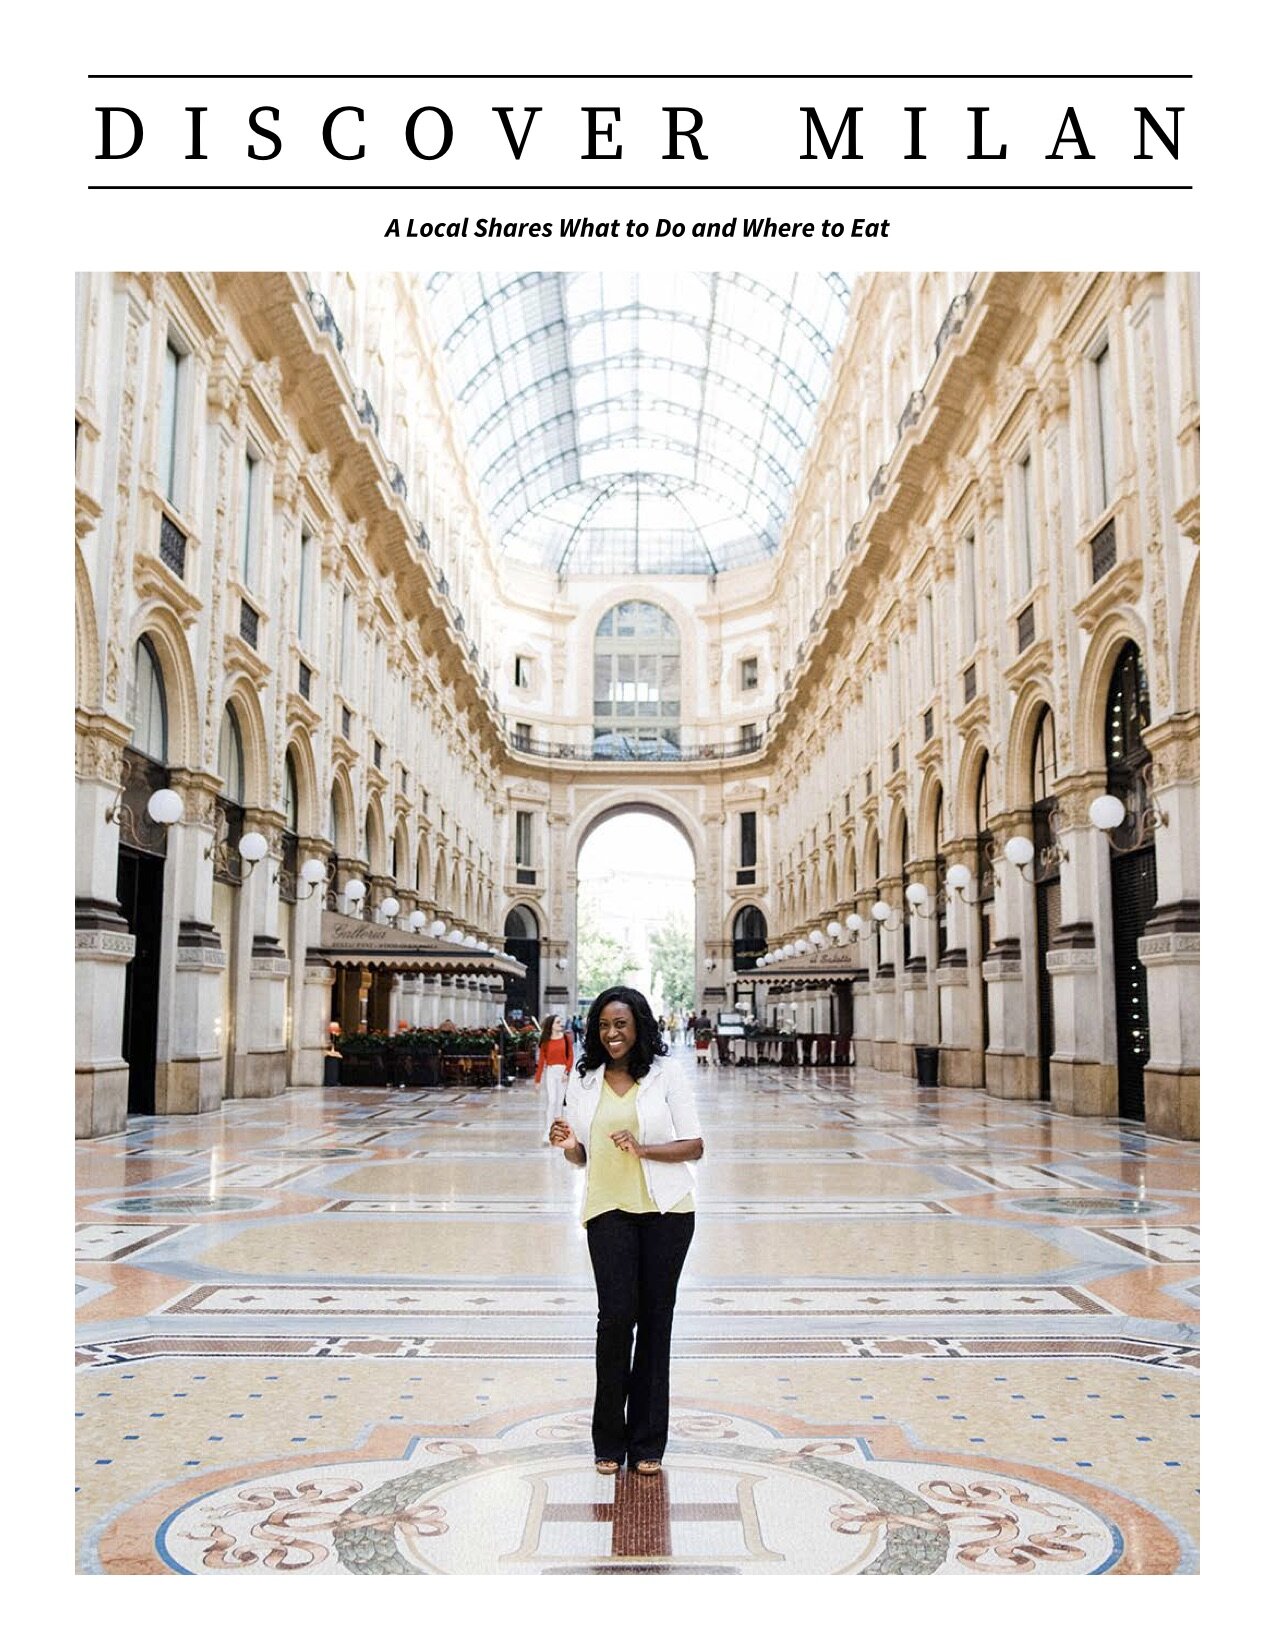 DISCOVER MILAN - Guidebook - COVER PAGE - 20191114.jpg